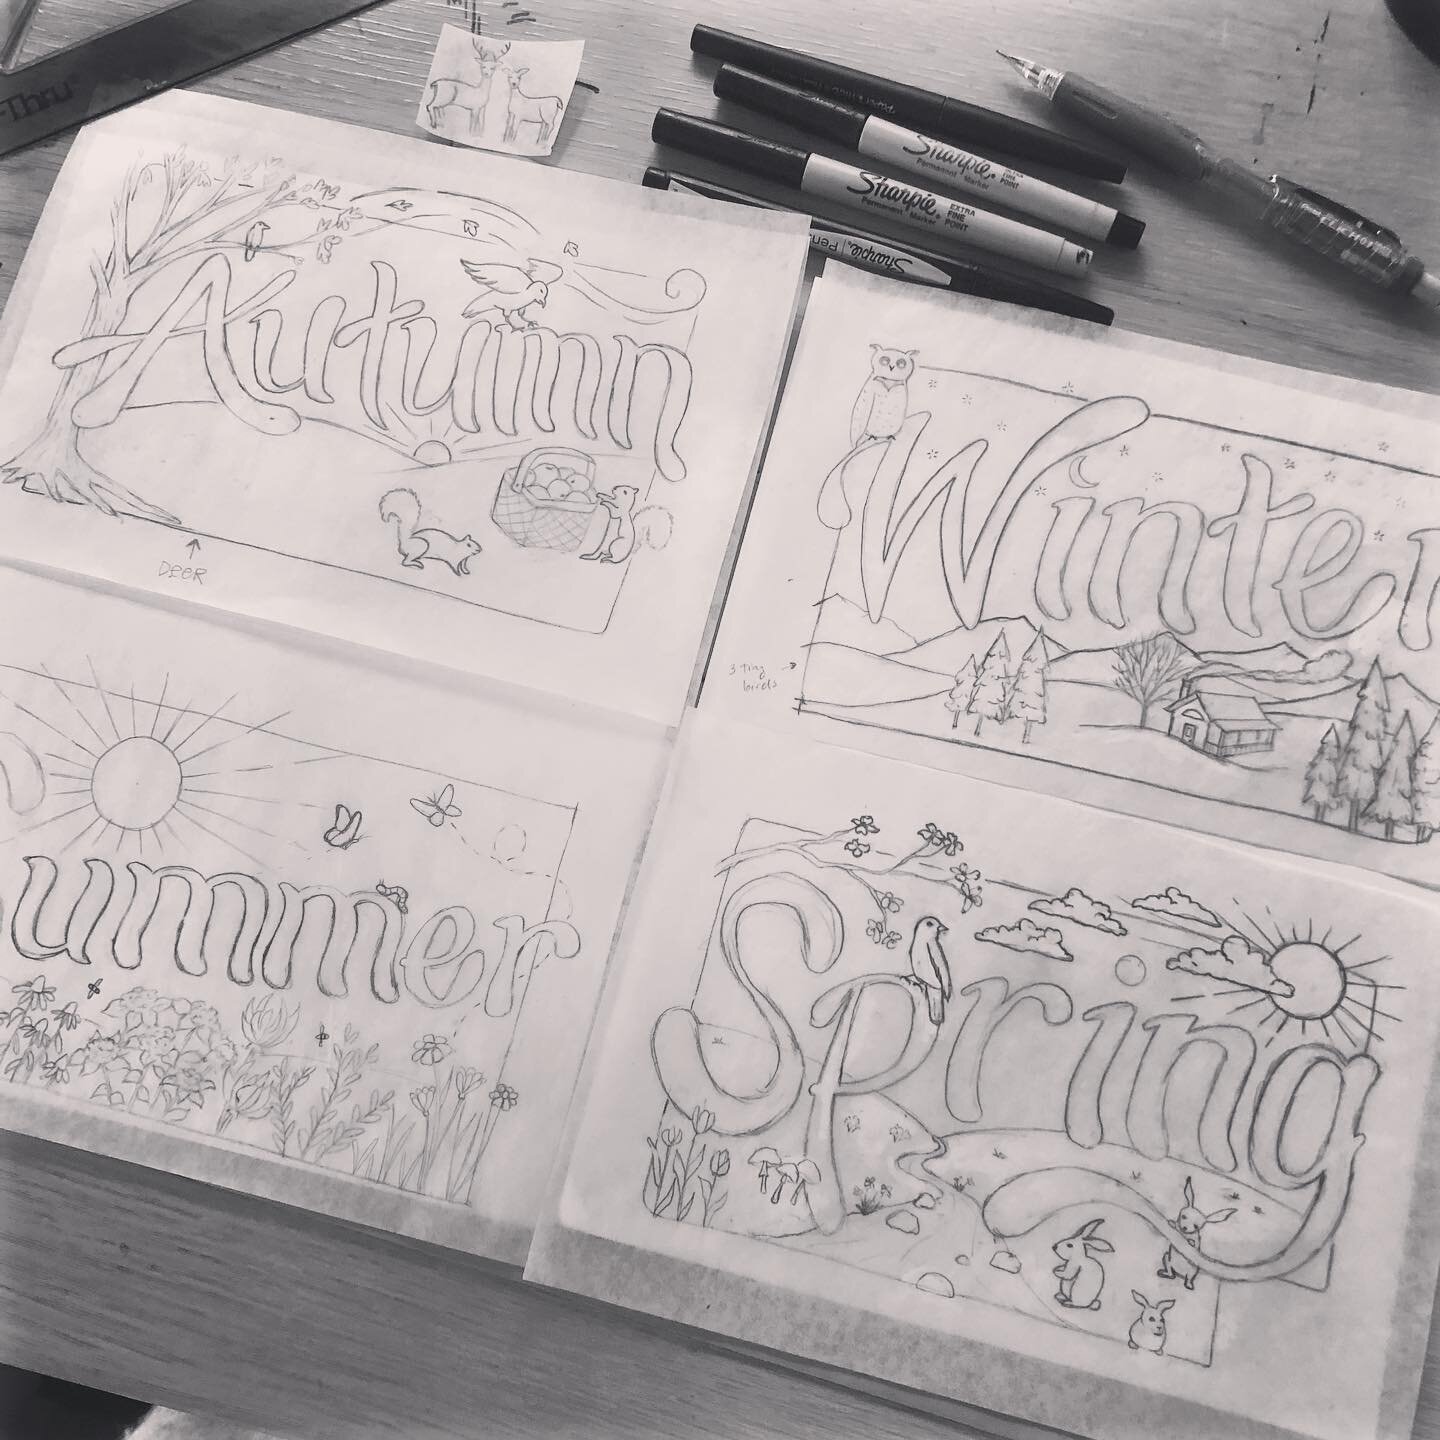 Some seasonal drawings I&rsquo;ve been working on. I&rsquo;m excited about these! I&rsquo;ll share more about this later... 

#seasonal #seasons #wip